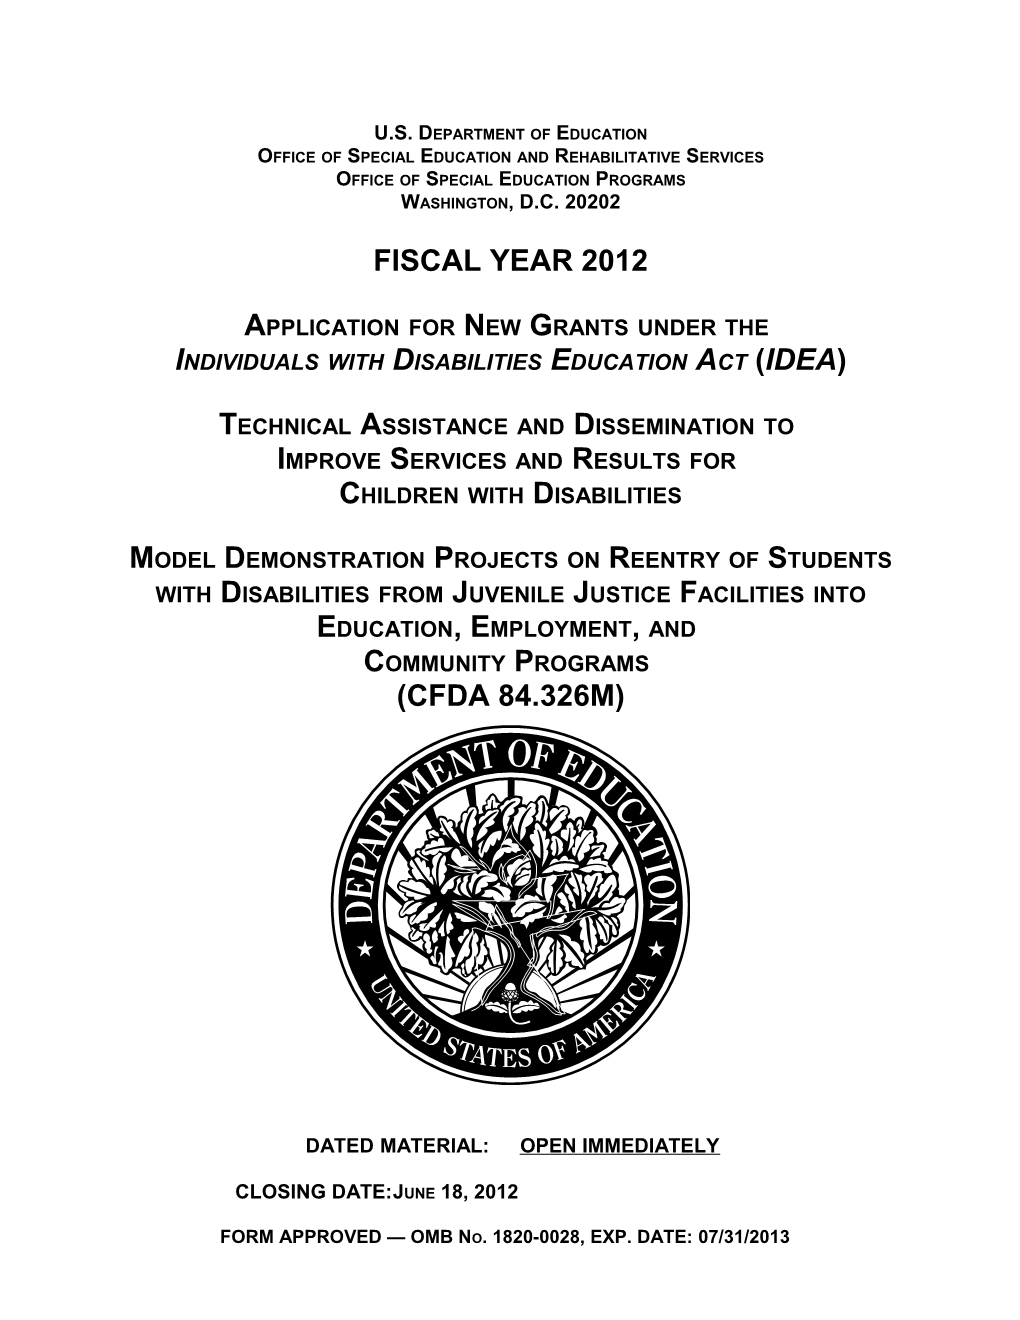 FY 2012 Application for New Grants Under the Individuals with Disabilities Education Act